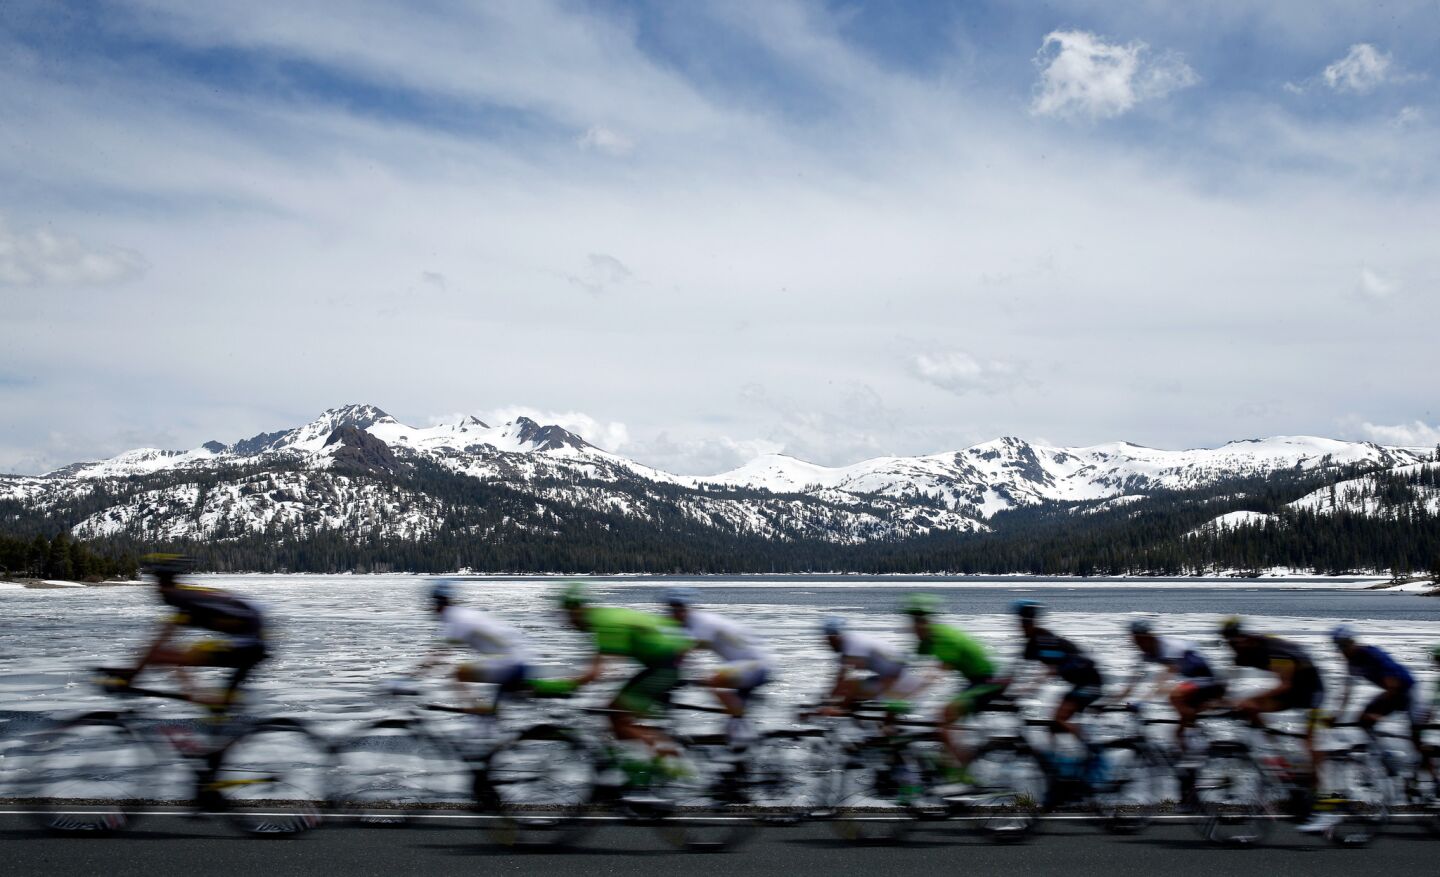 Riders in the peleton cycle along Caples Lake during the fifth stage of the Amgen Tour of California on May 19.